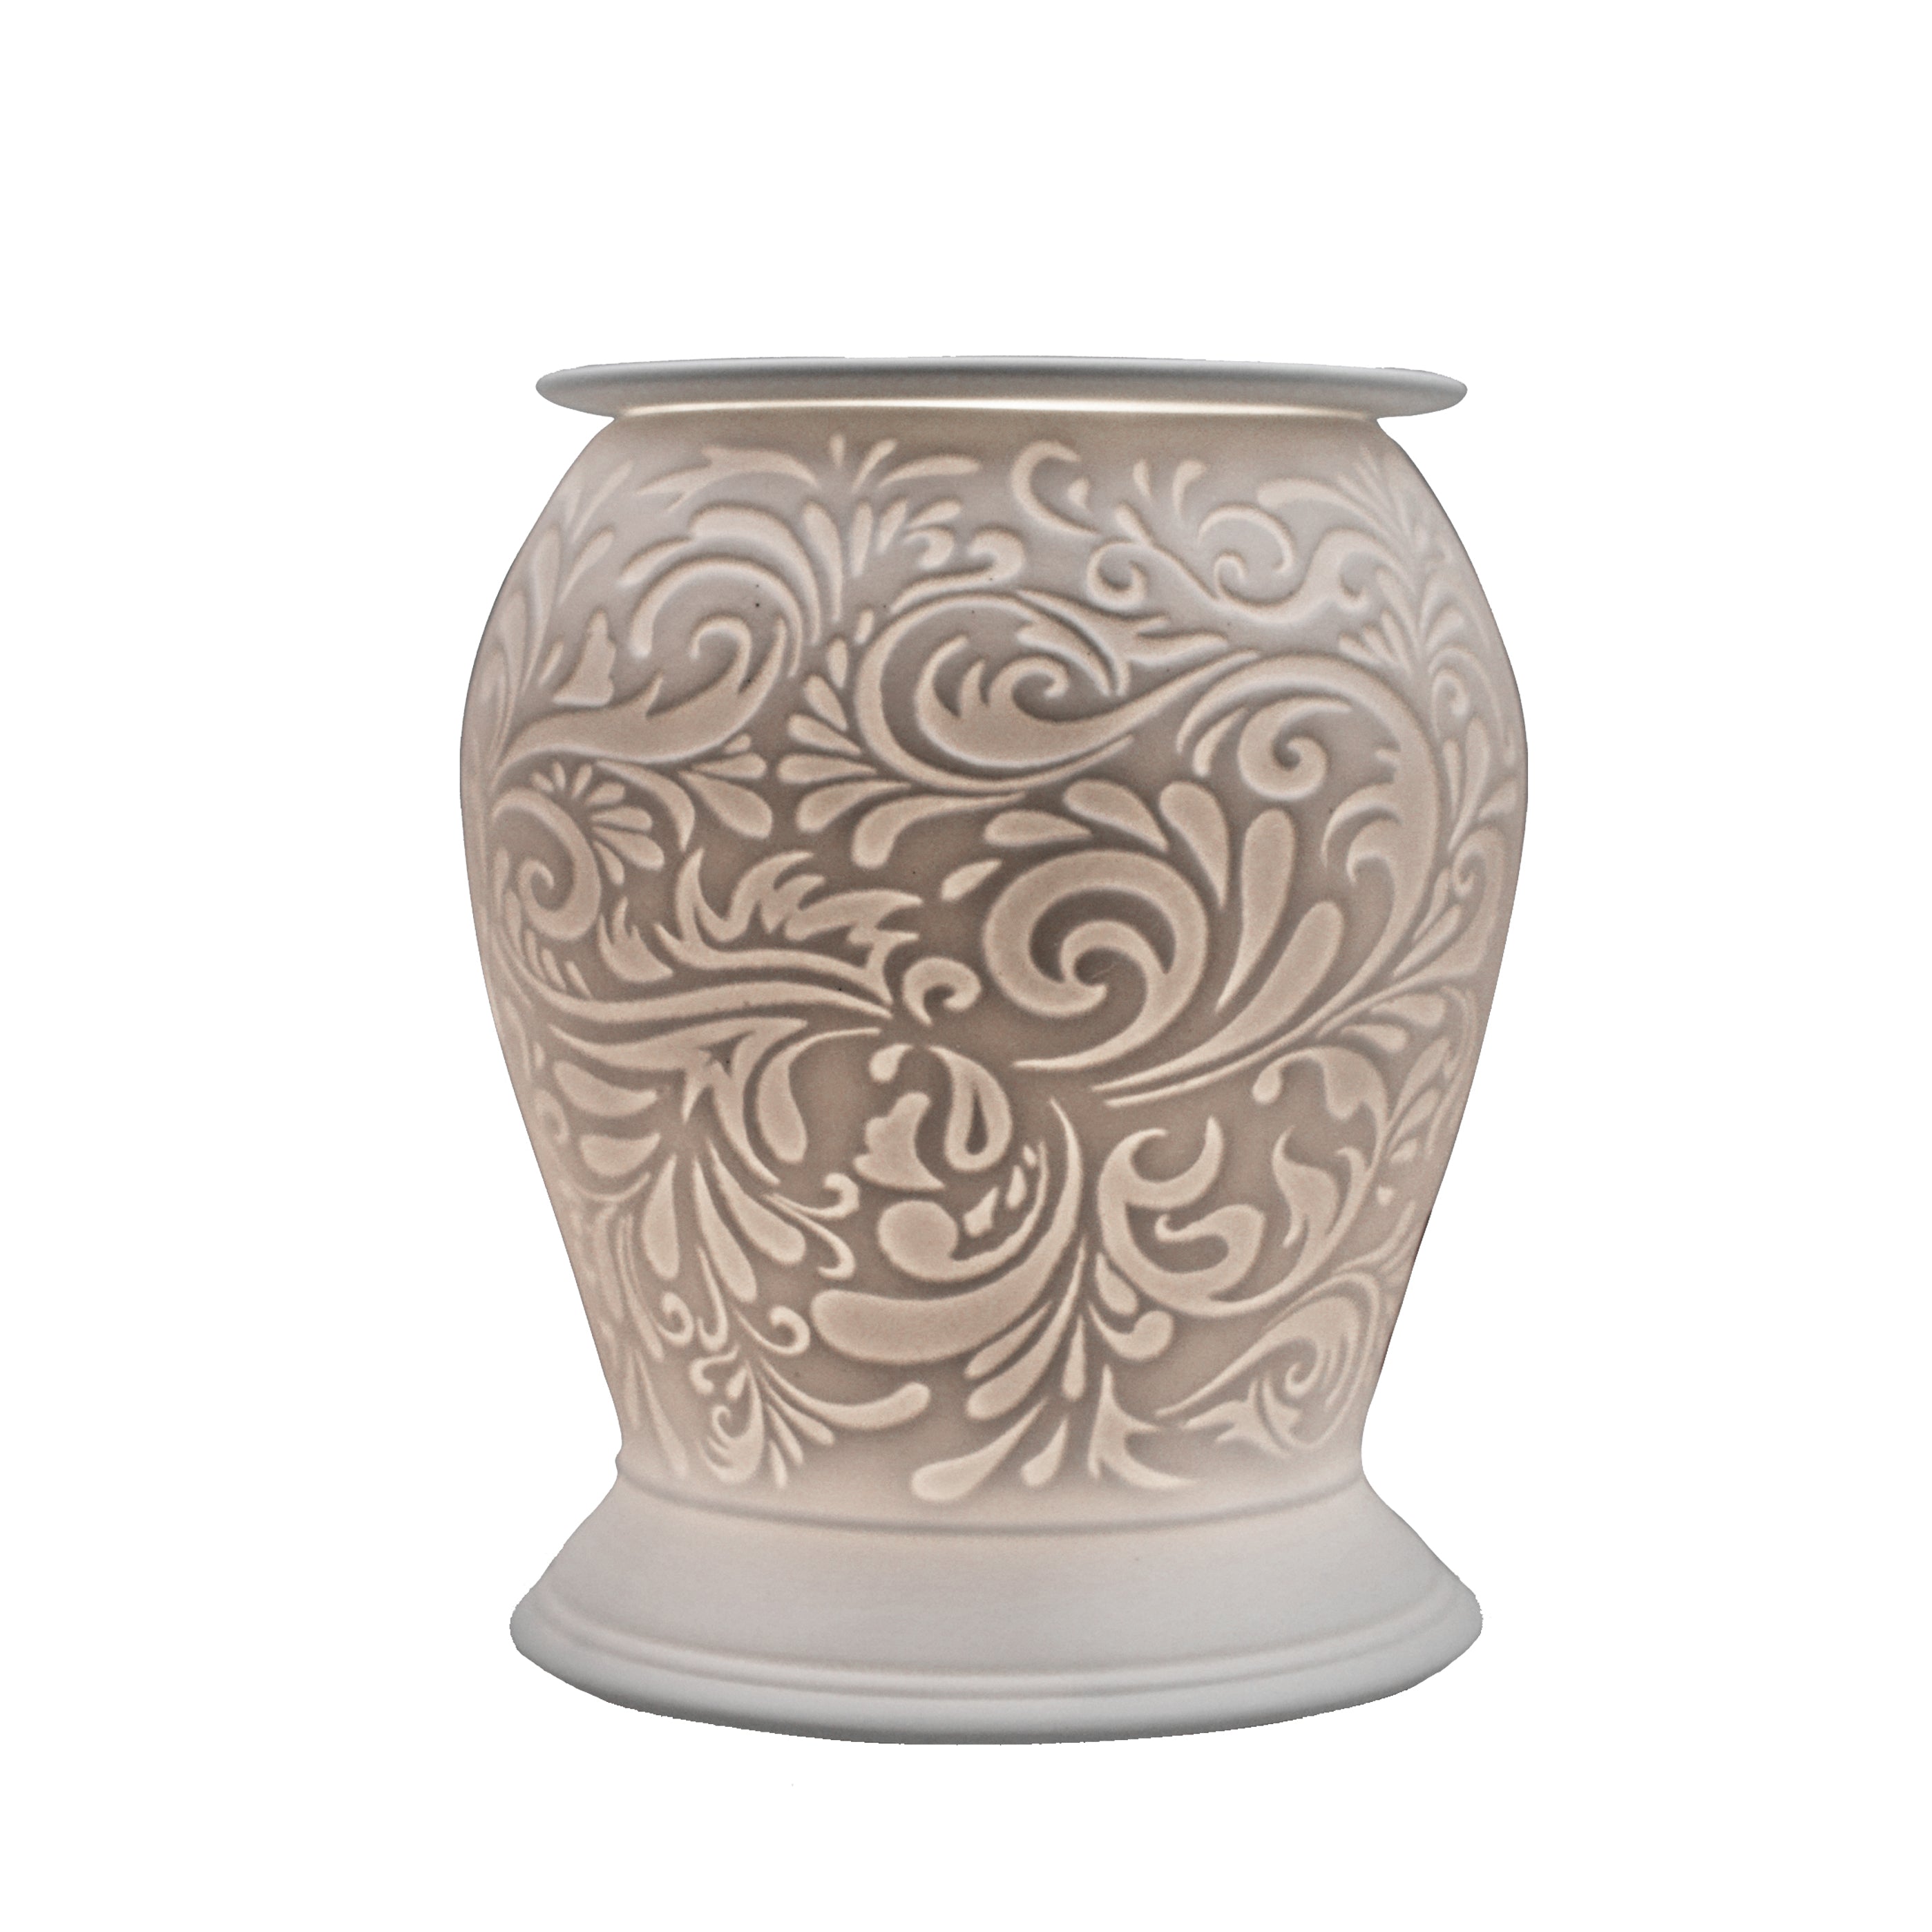 The porcelain material on this Wax Melt Burner allows bright light to shine through it, providing the opportunity to create this gorgeous Swirl design. This is done by crafting images out of thicker and thinner sections of the porcelain, allowing for detailed shadowing and a 3D effect. The porcelains elegant look will fit perfectly in any room is available in a range of designs and two different shapes.